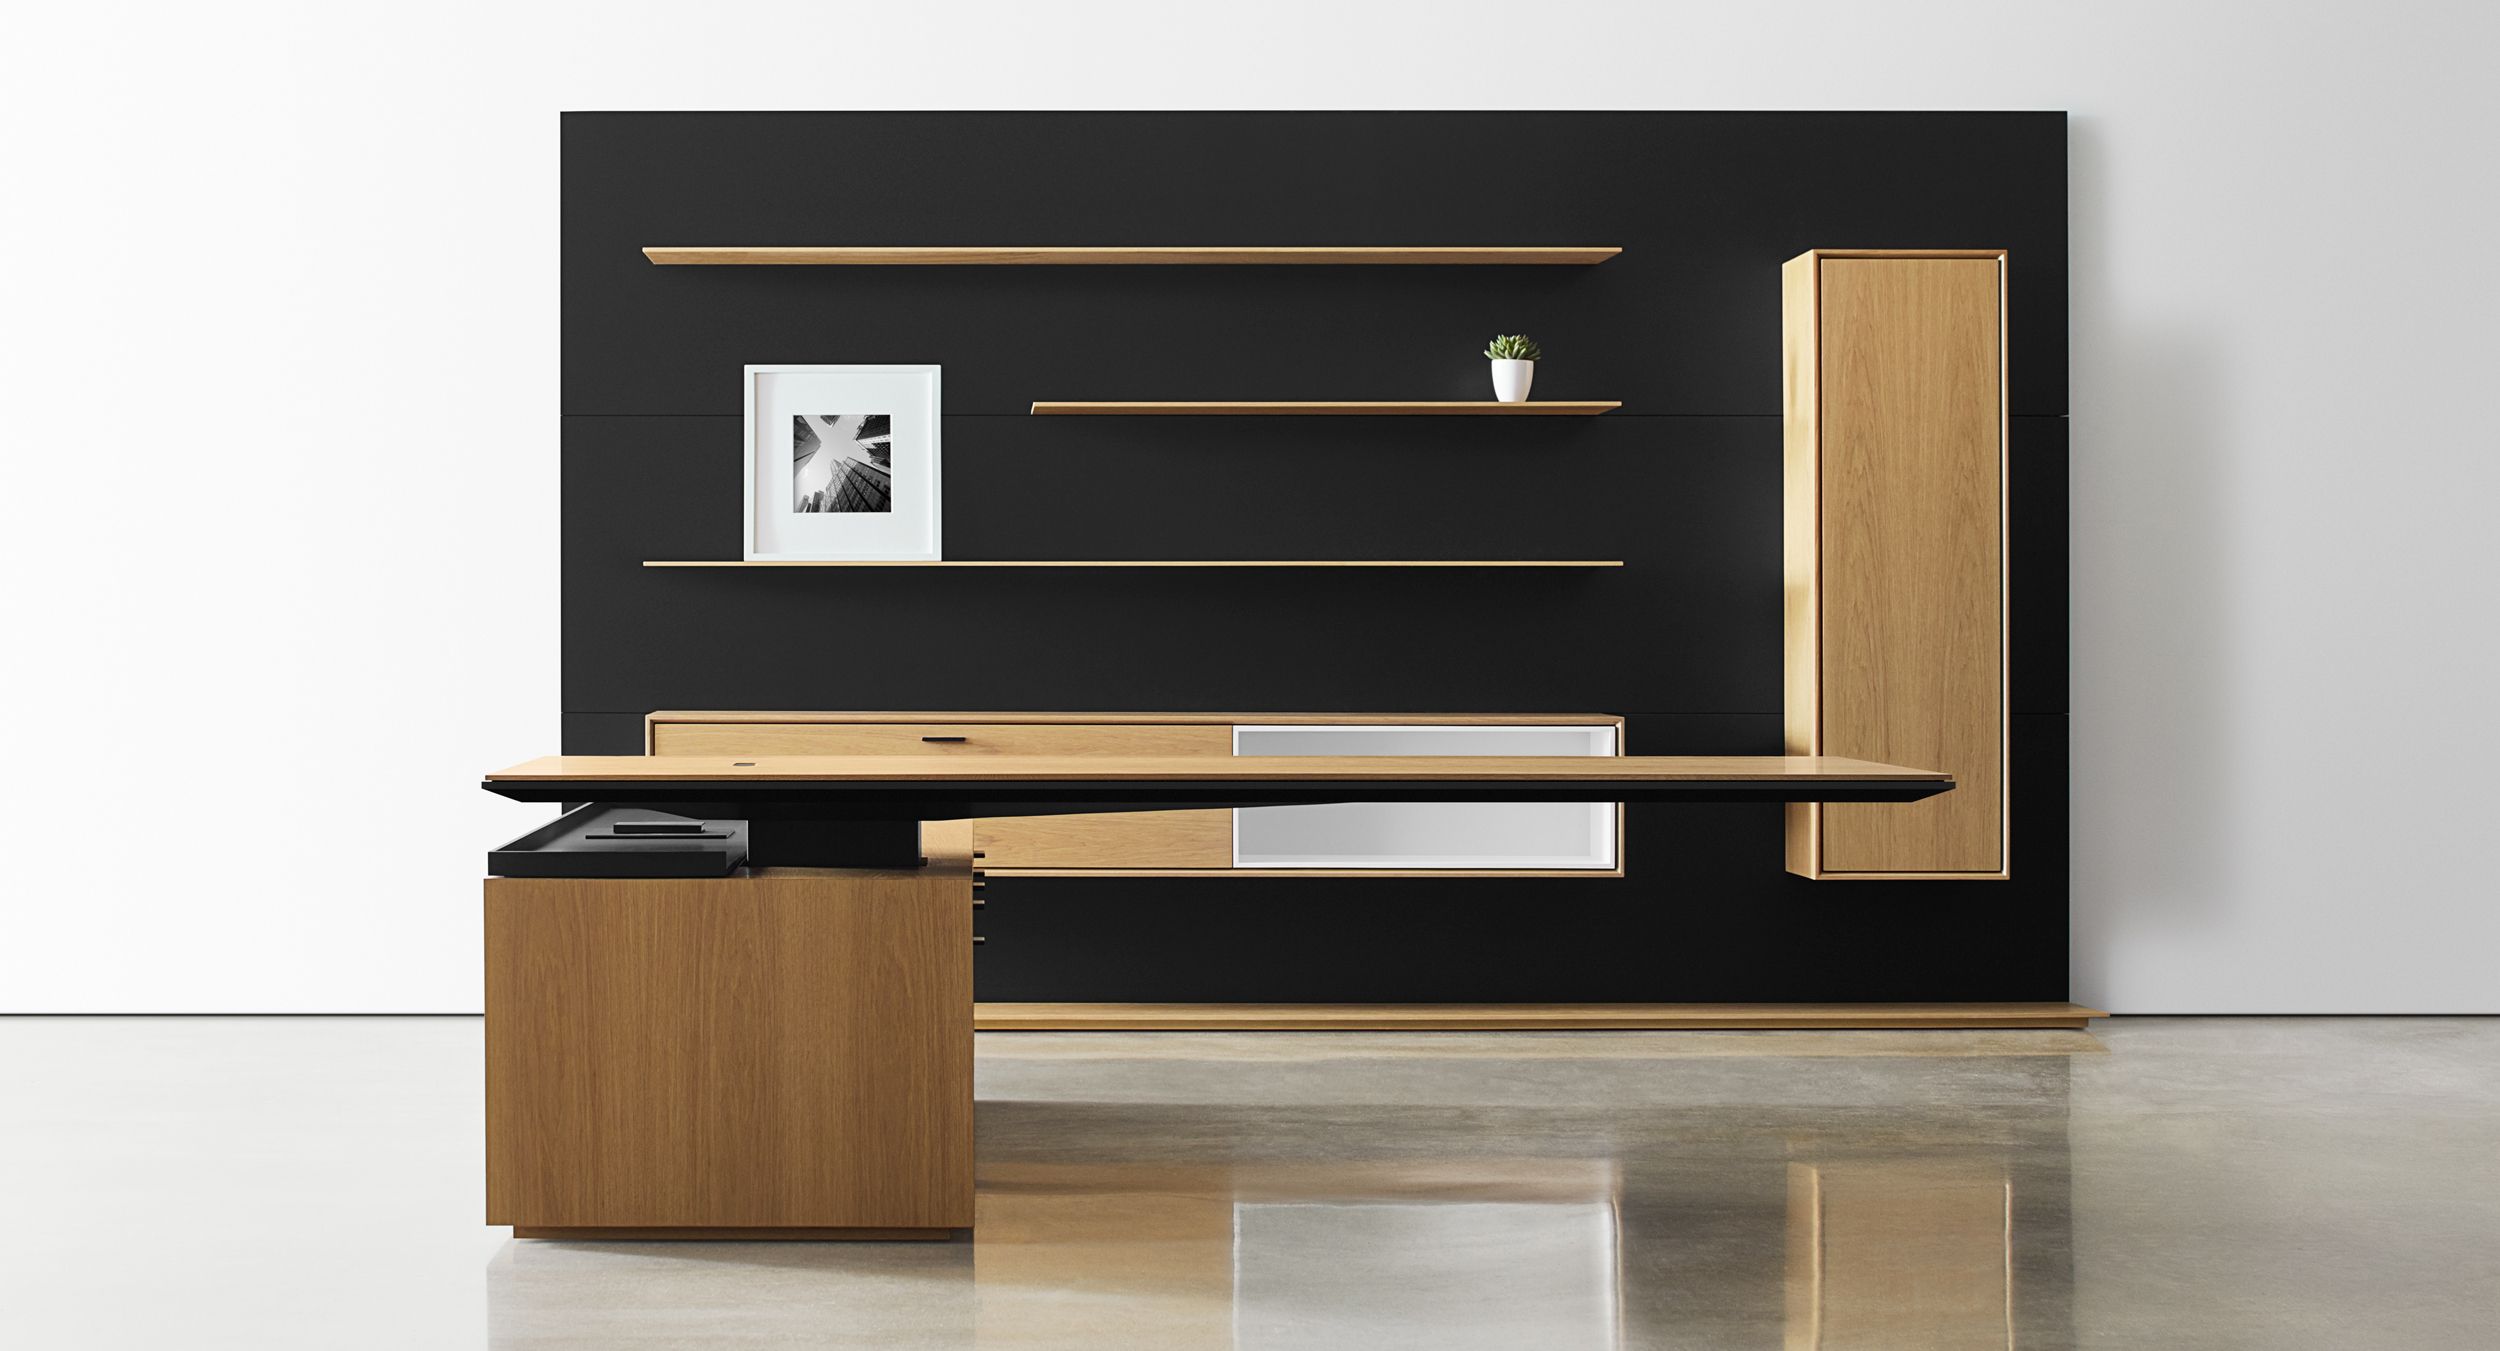 Defy gravity with an adjustable-height, cantilevered desk surface.